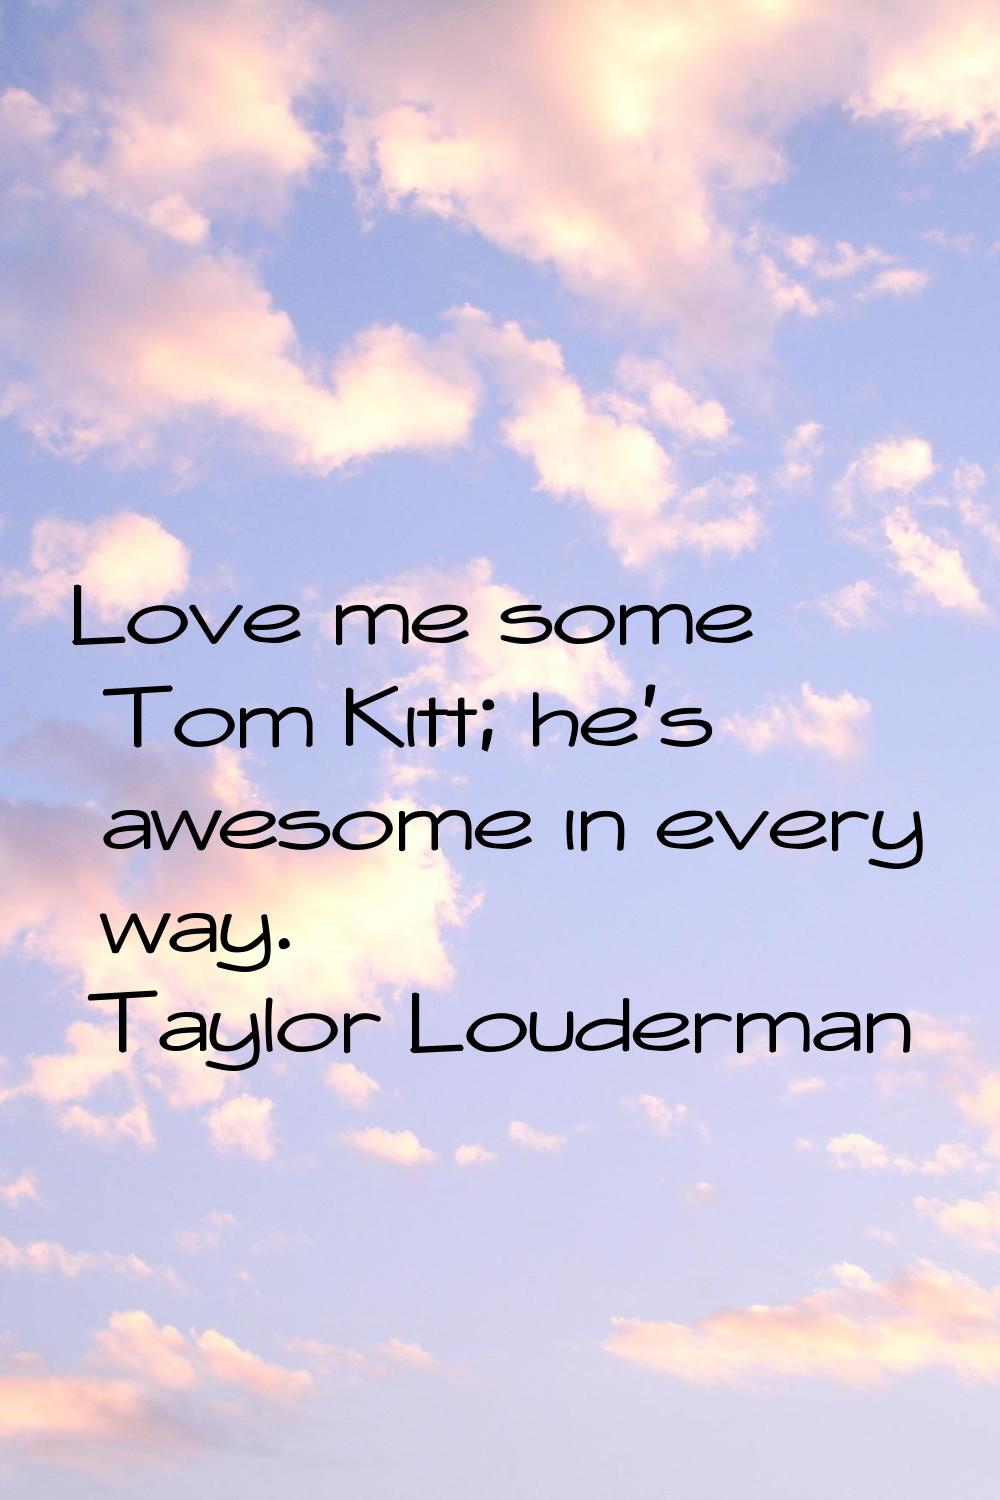 Love me some Tom Kitt; he's awesome in every way.